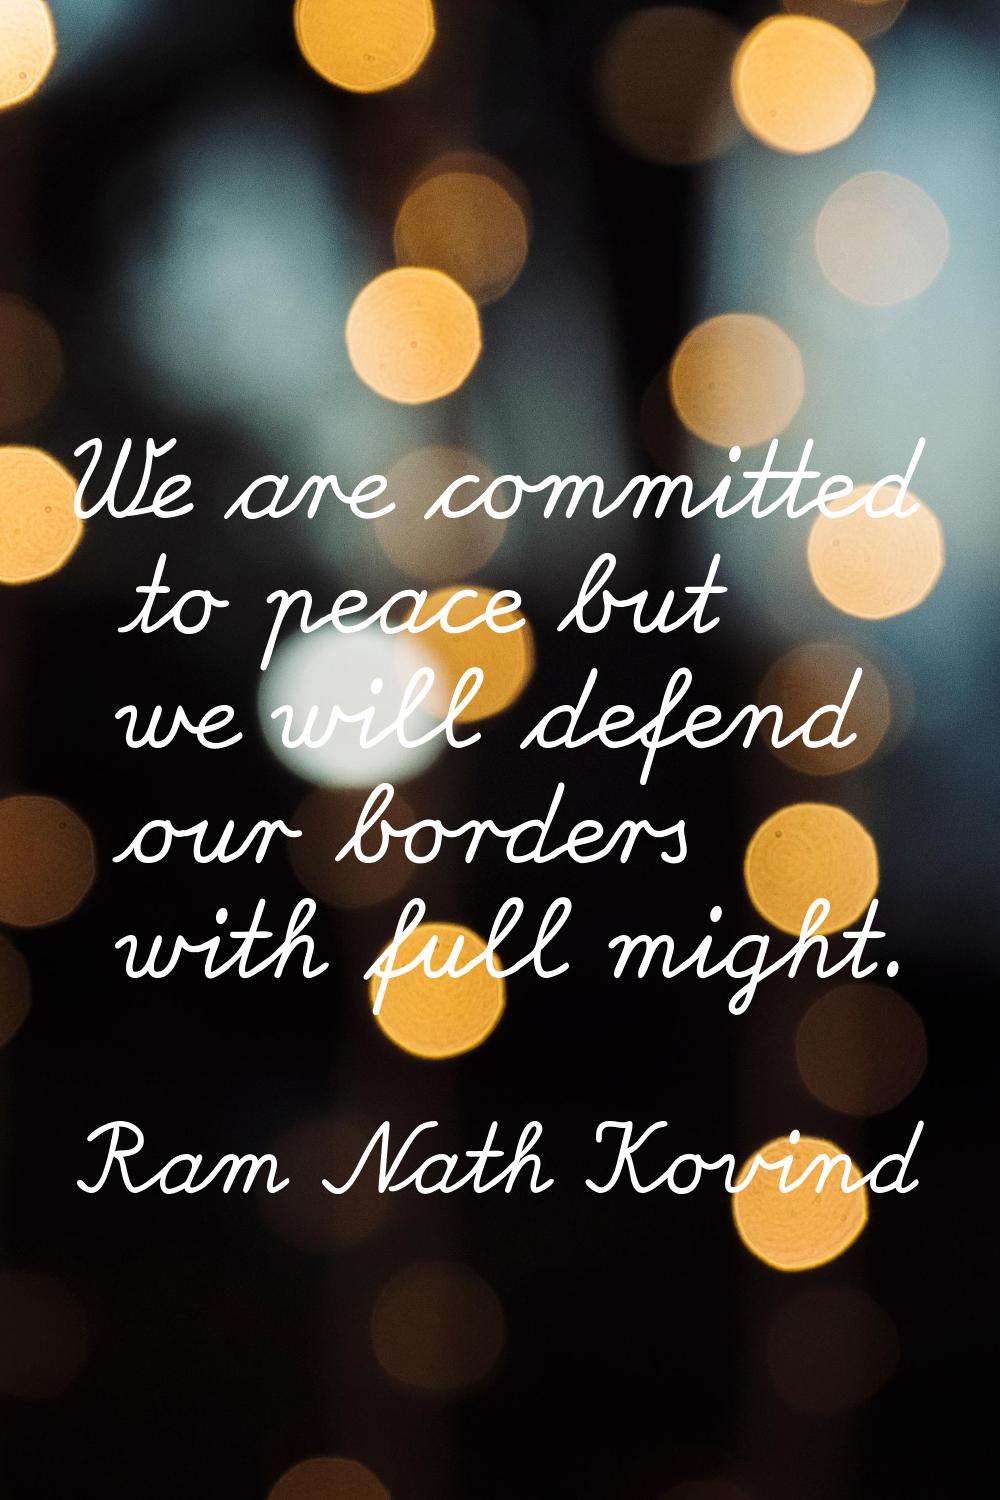 We are committed to peace but we will defend our borders with full might.